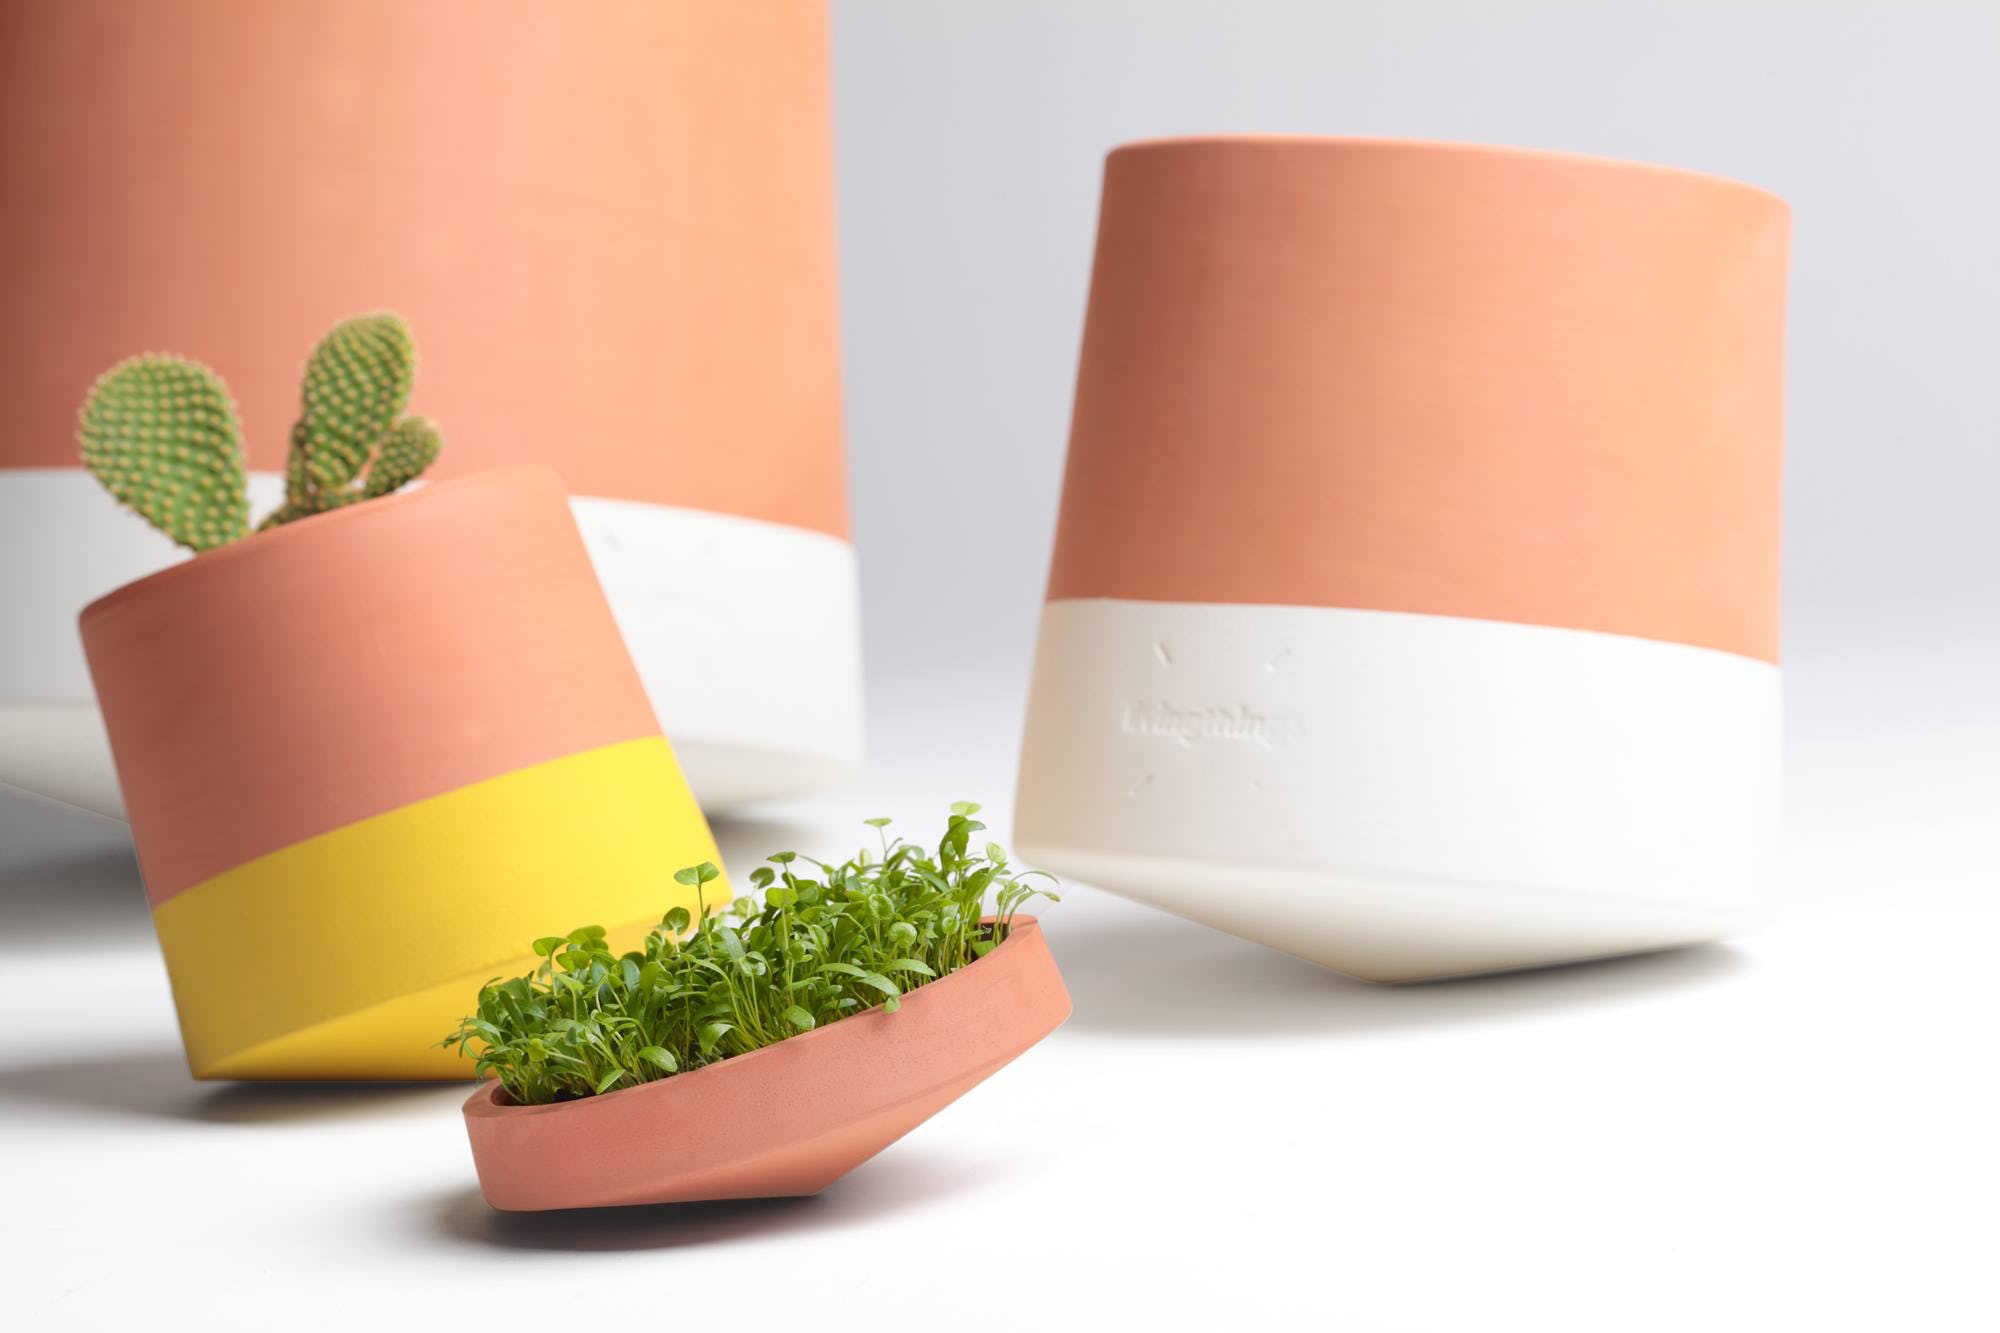 Terracotta-planters-from-Crowdyhouse